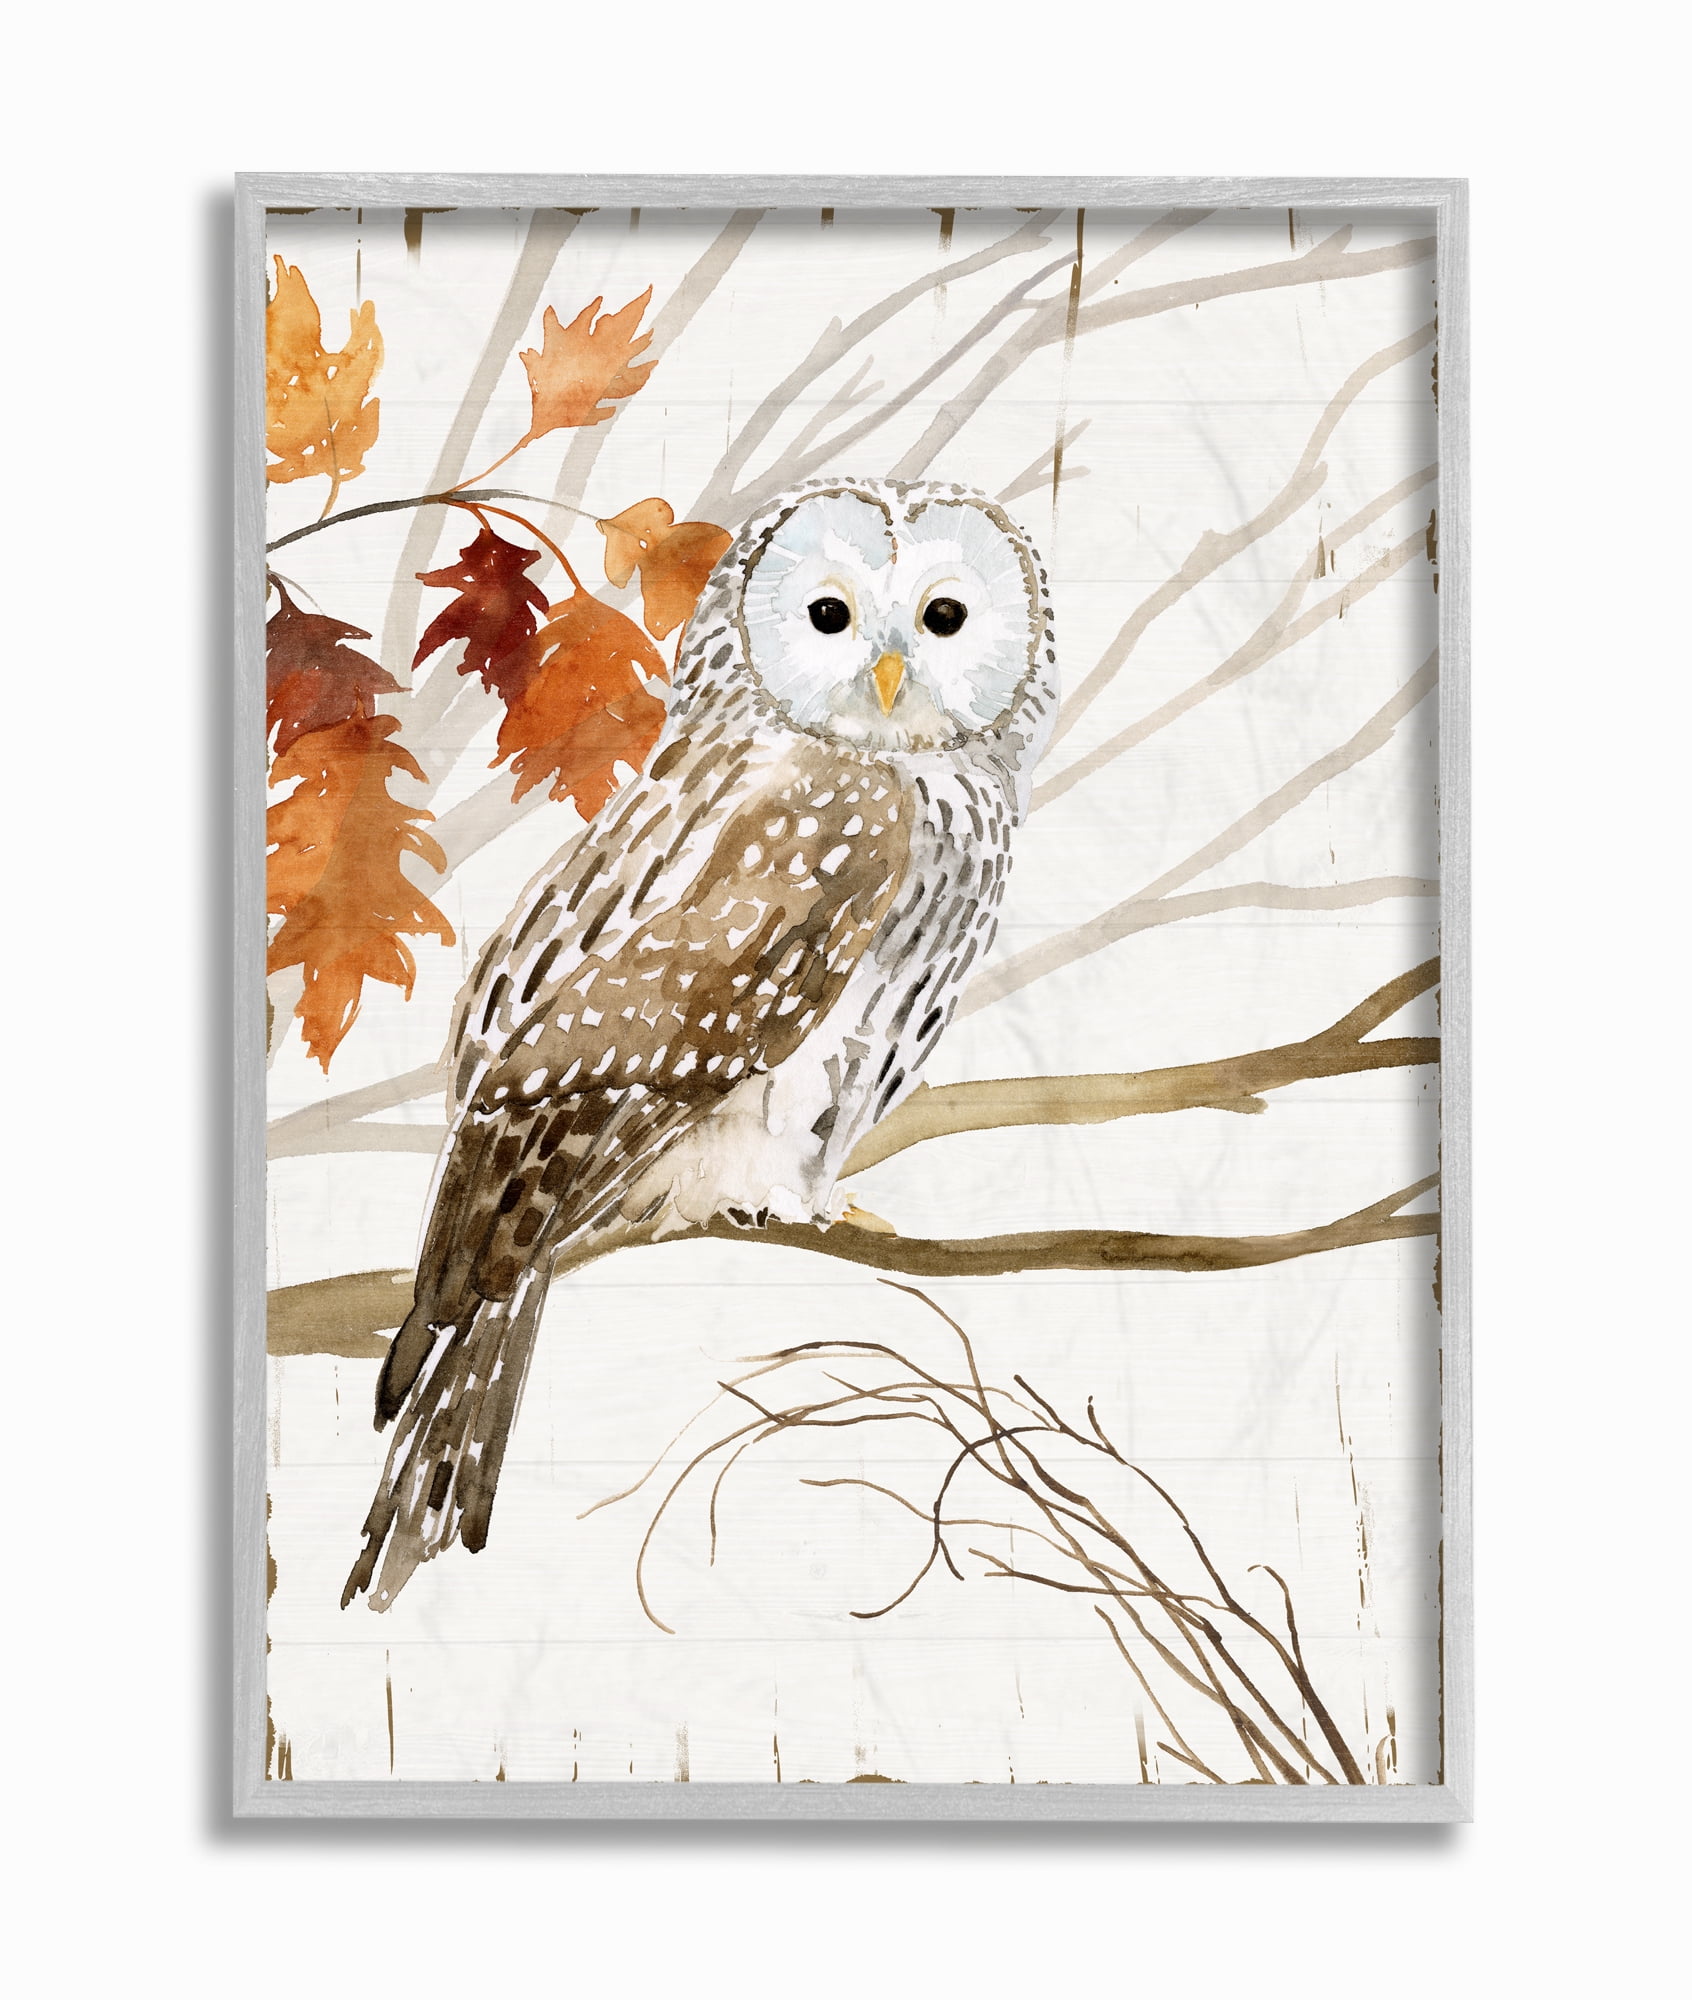 Stupell Industries Owl In Autumn Forest Animal Watercolor Painting Gray Framed Wall Art, 11 X 14, Byvictoria Borges - Walmart.com